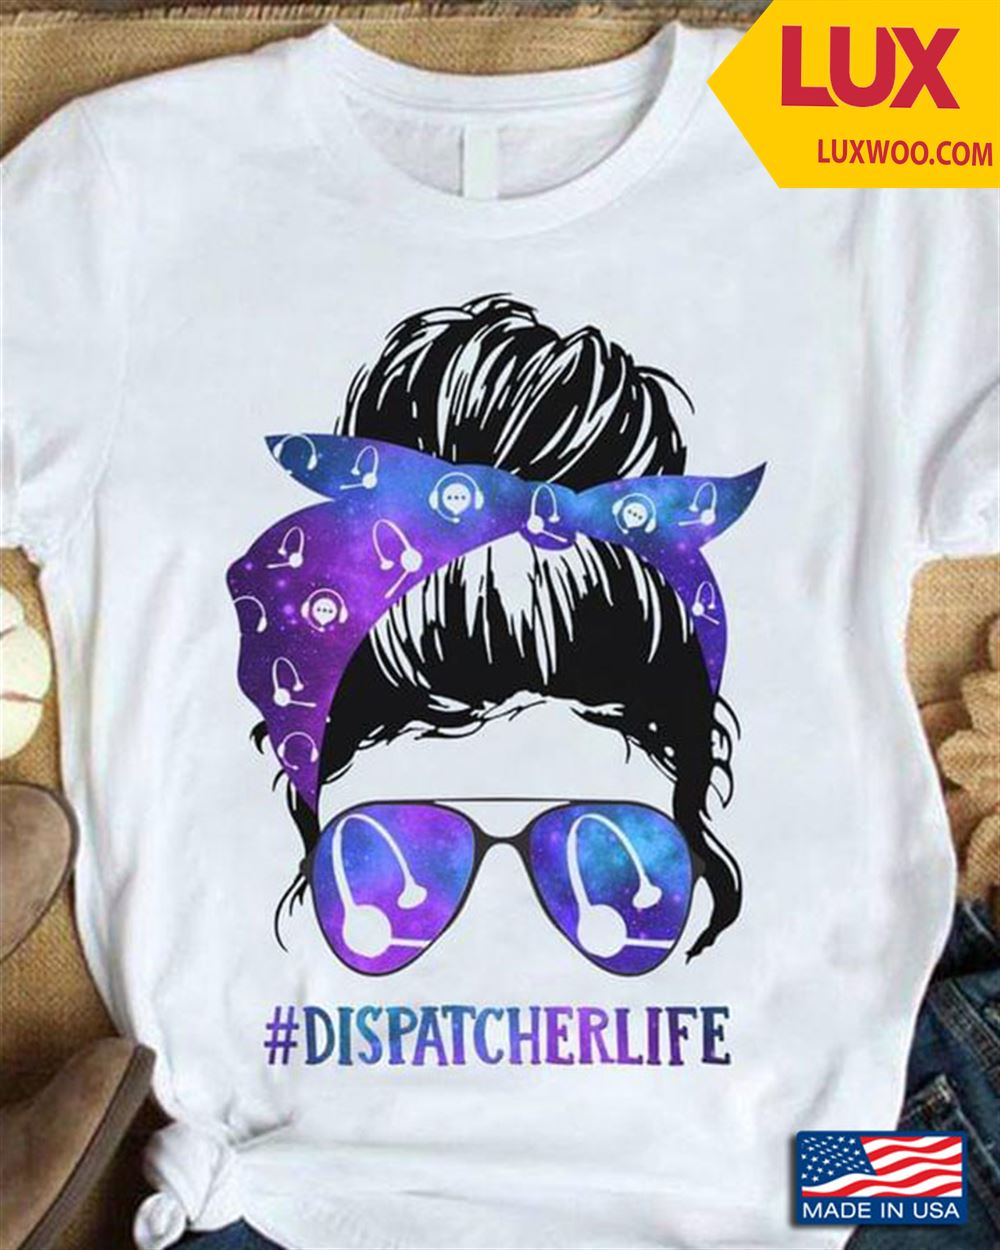 Dispatcher Life Woman With Headband And Glasses Shirt Size Up To 5xl